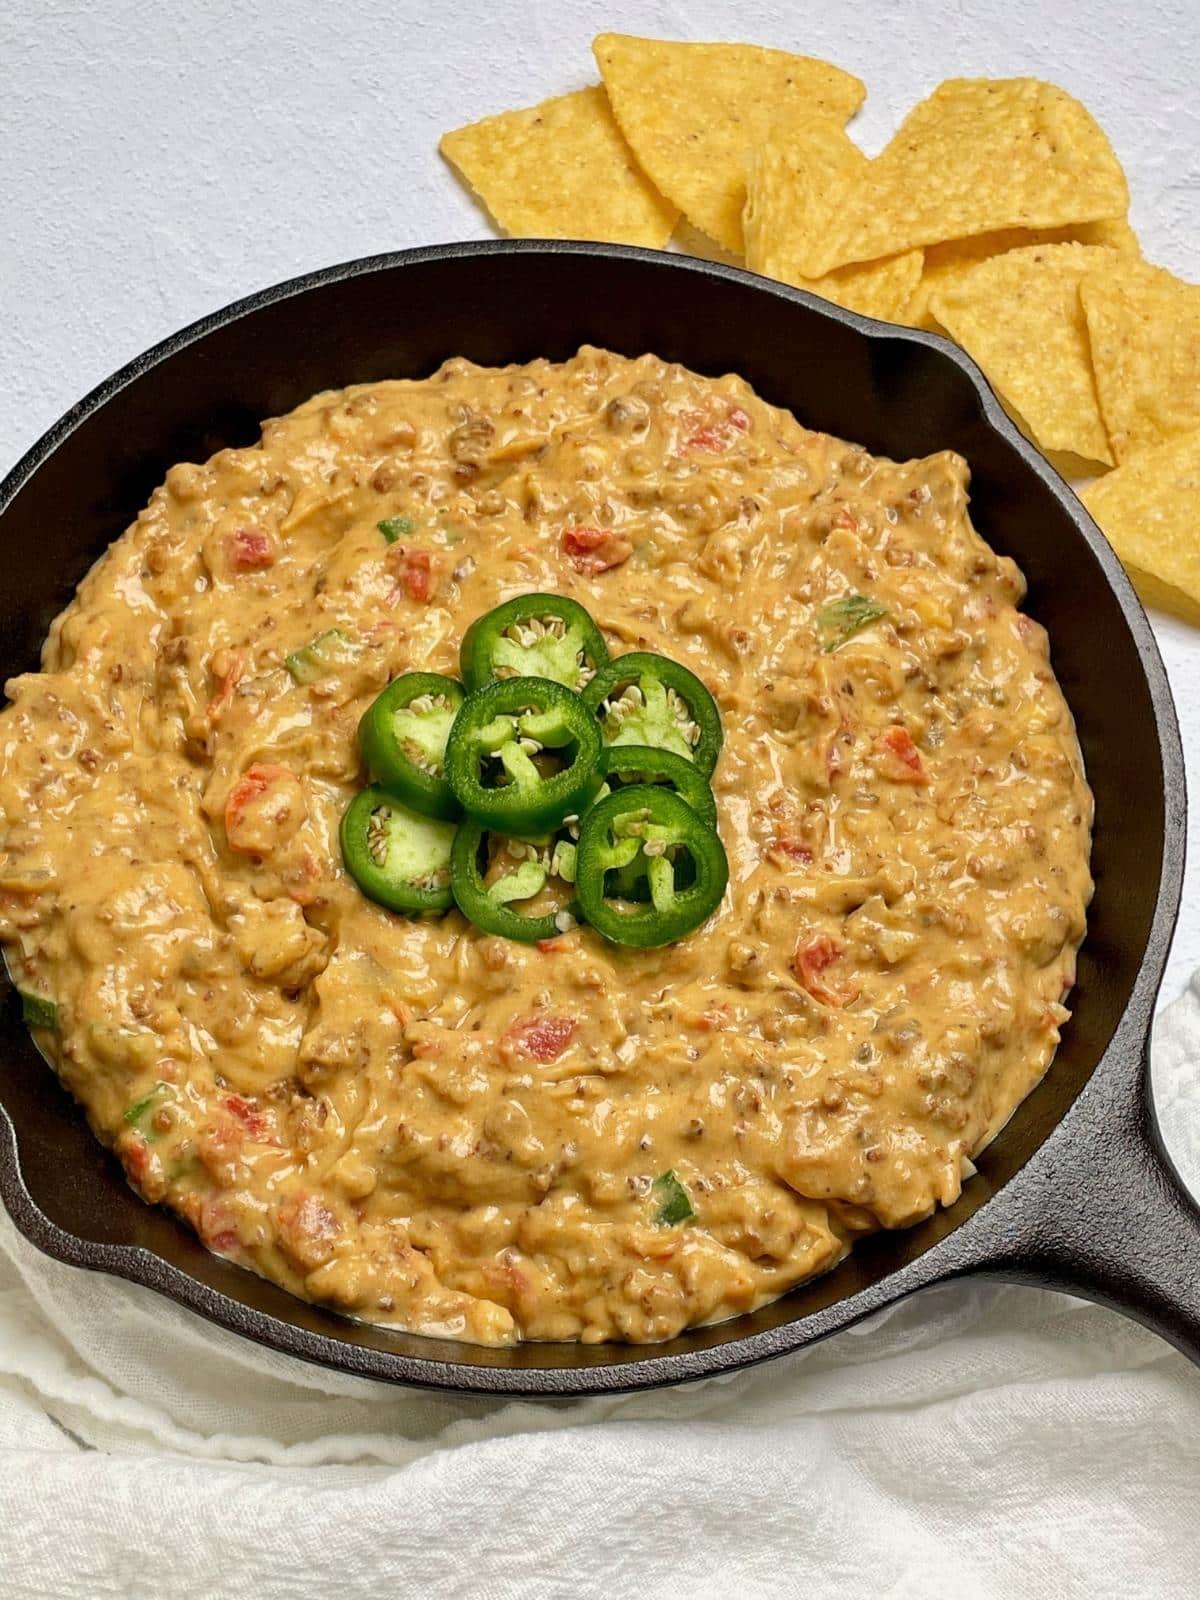 Rotel dip topped with jalapenos.